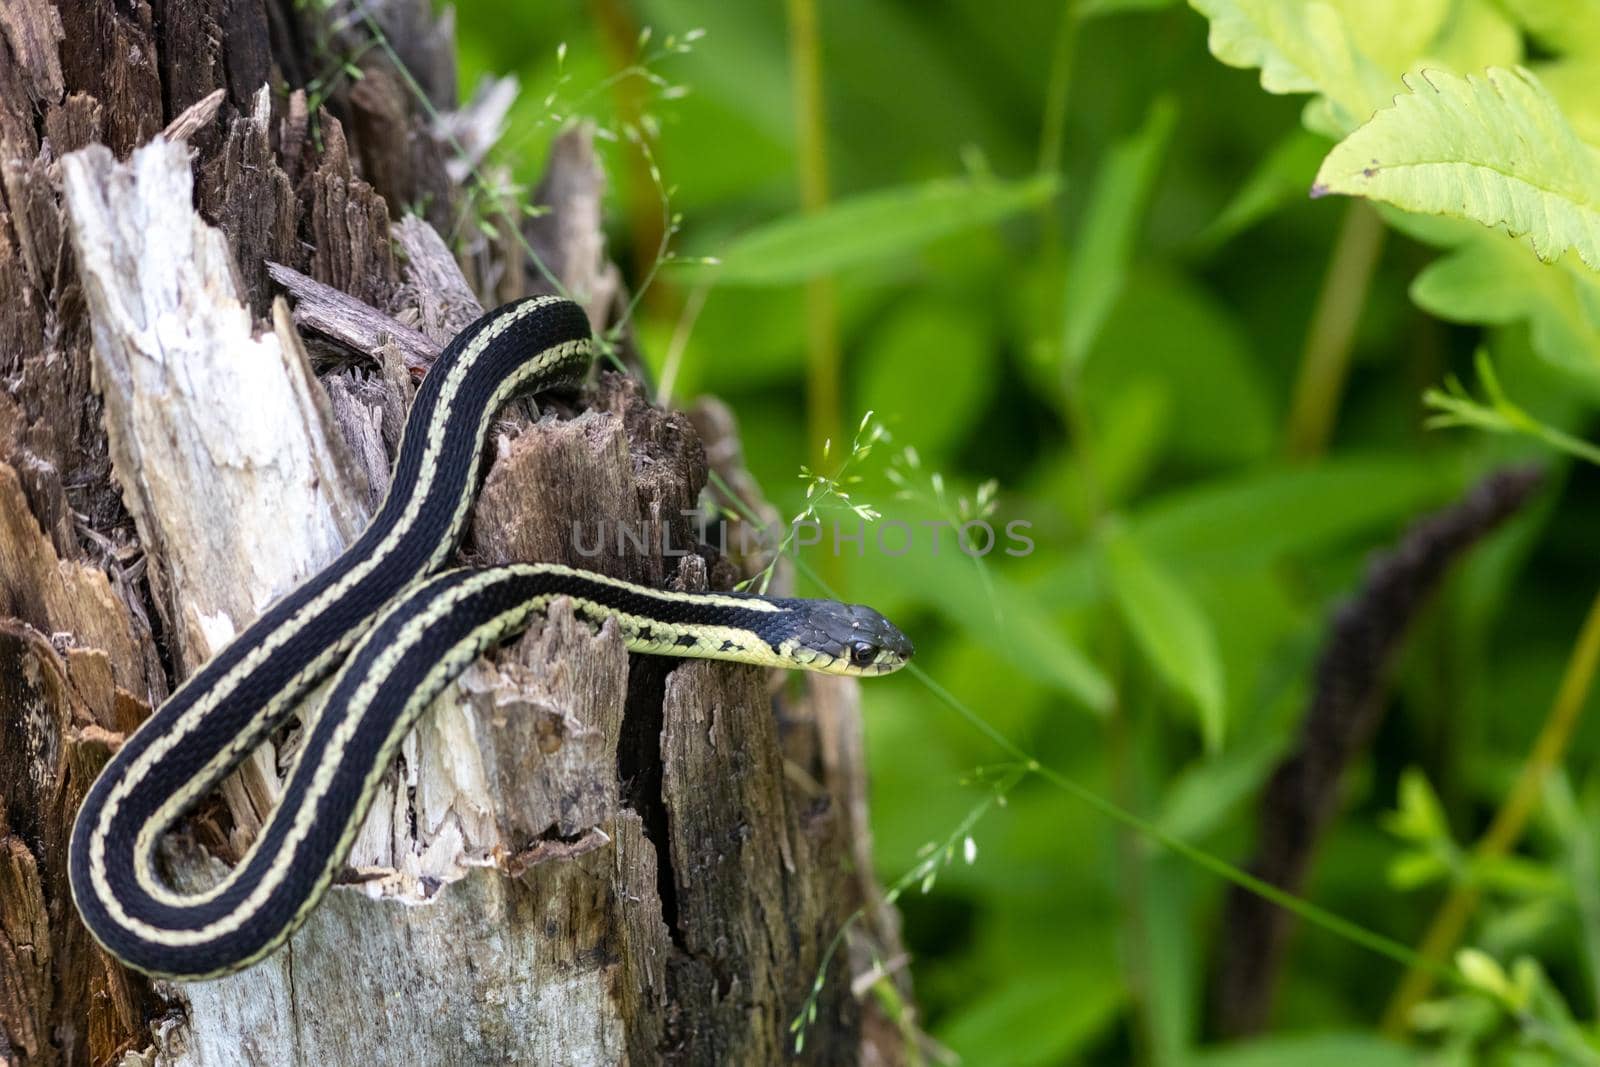 Garter snake on cracked tree stump by colintemple